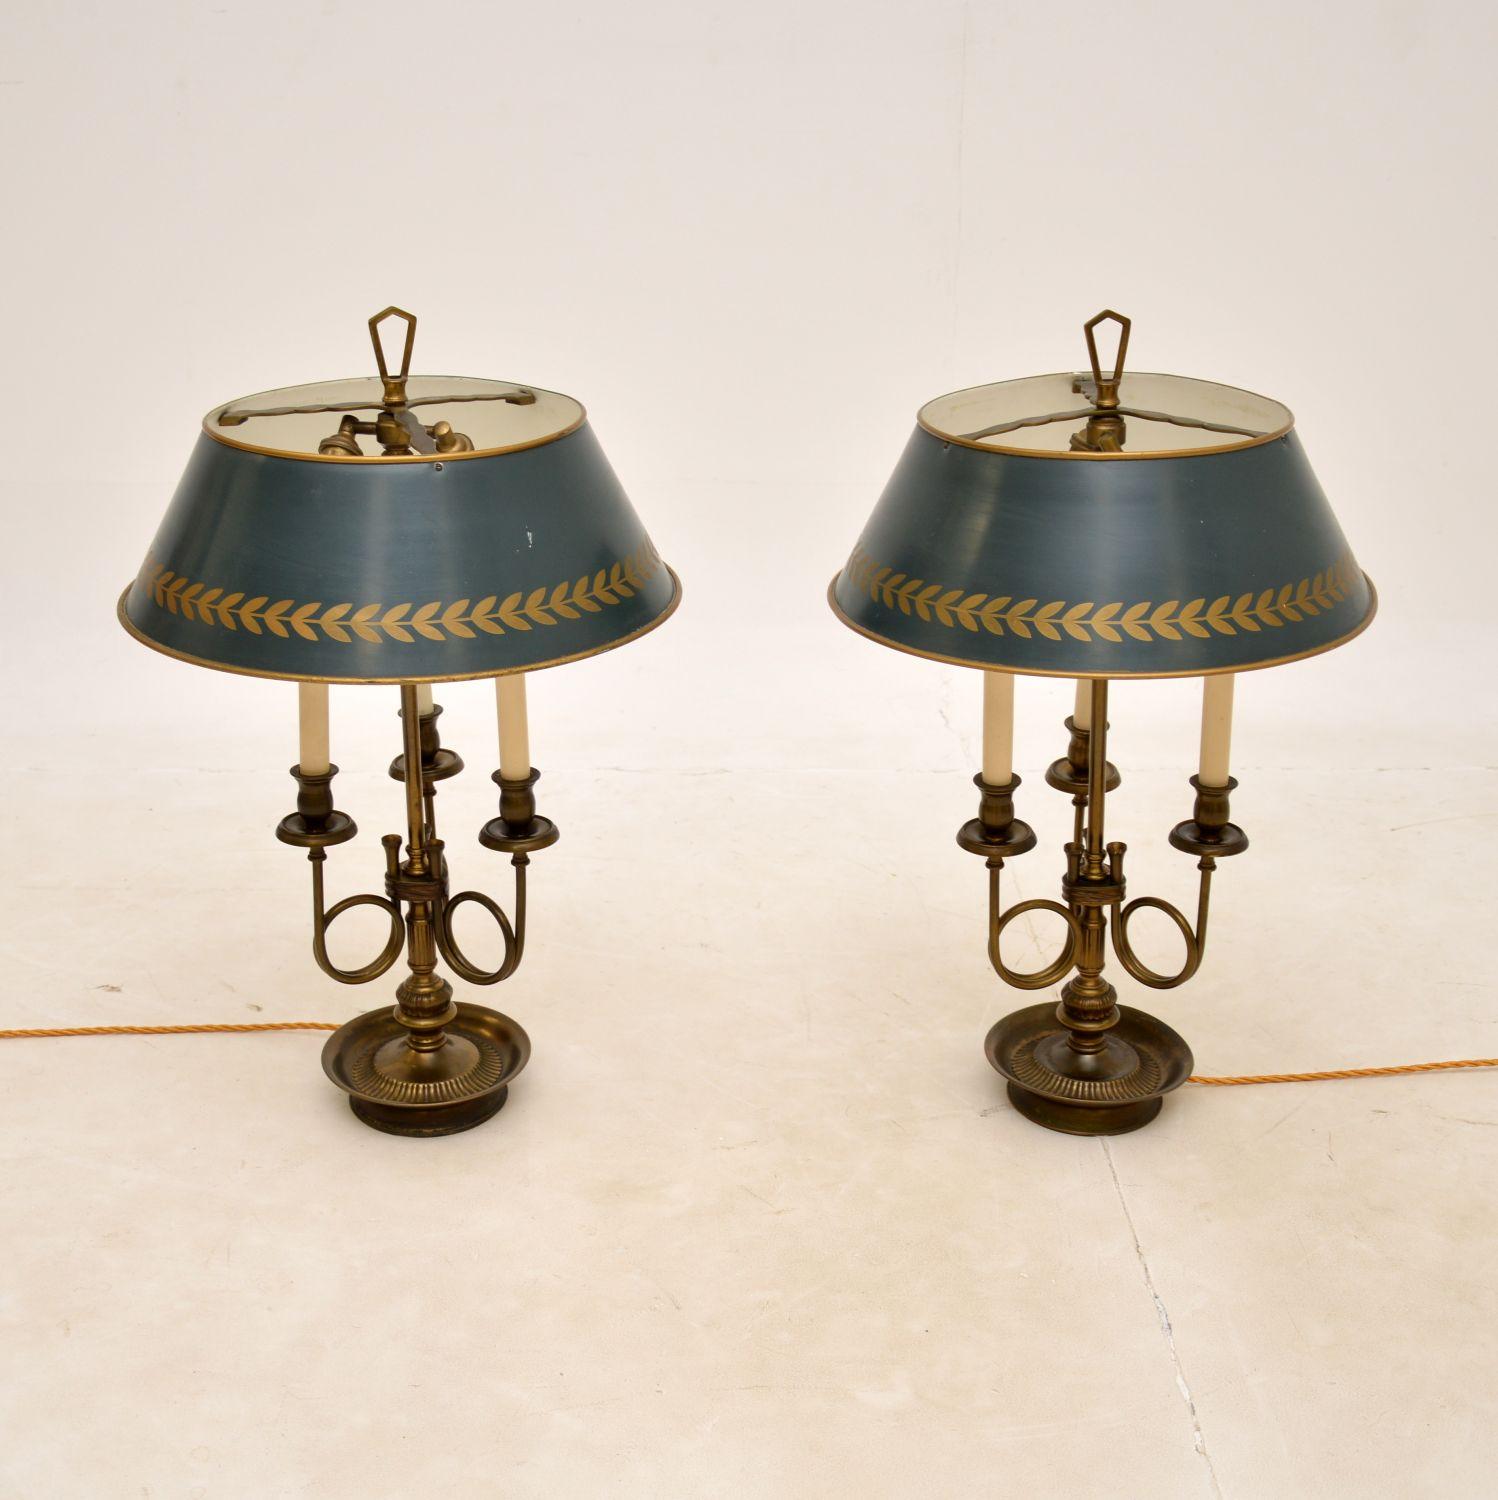 Neoclassical Pair of Antique Brass Table Lamps with Tole Shades